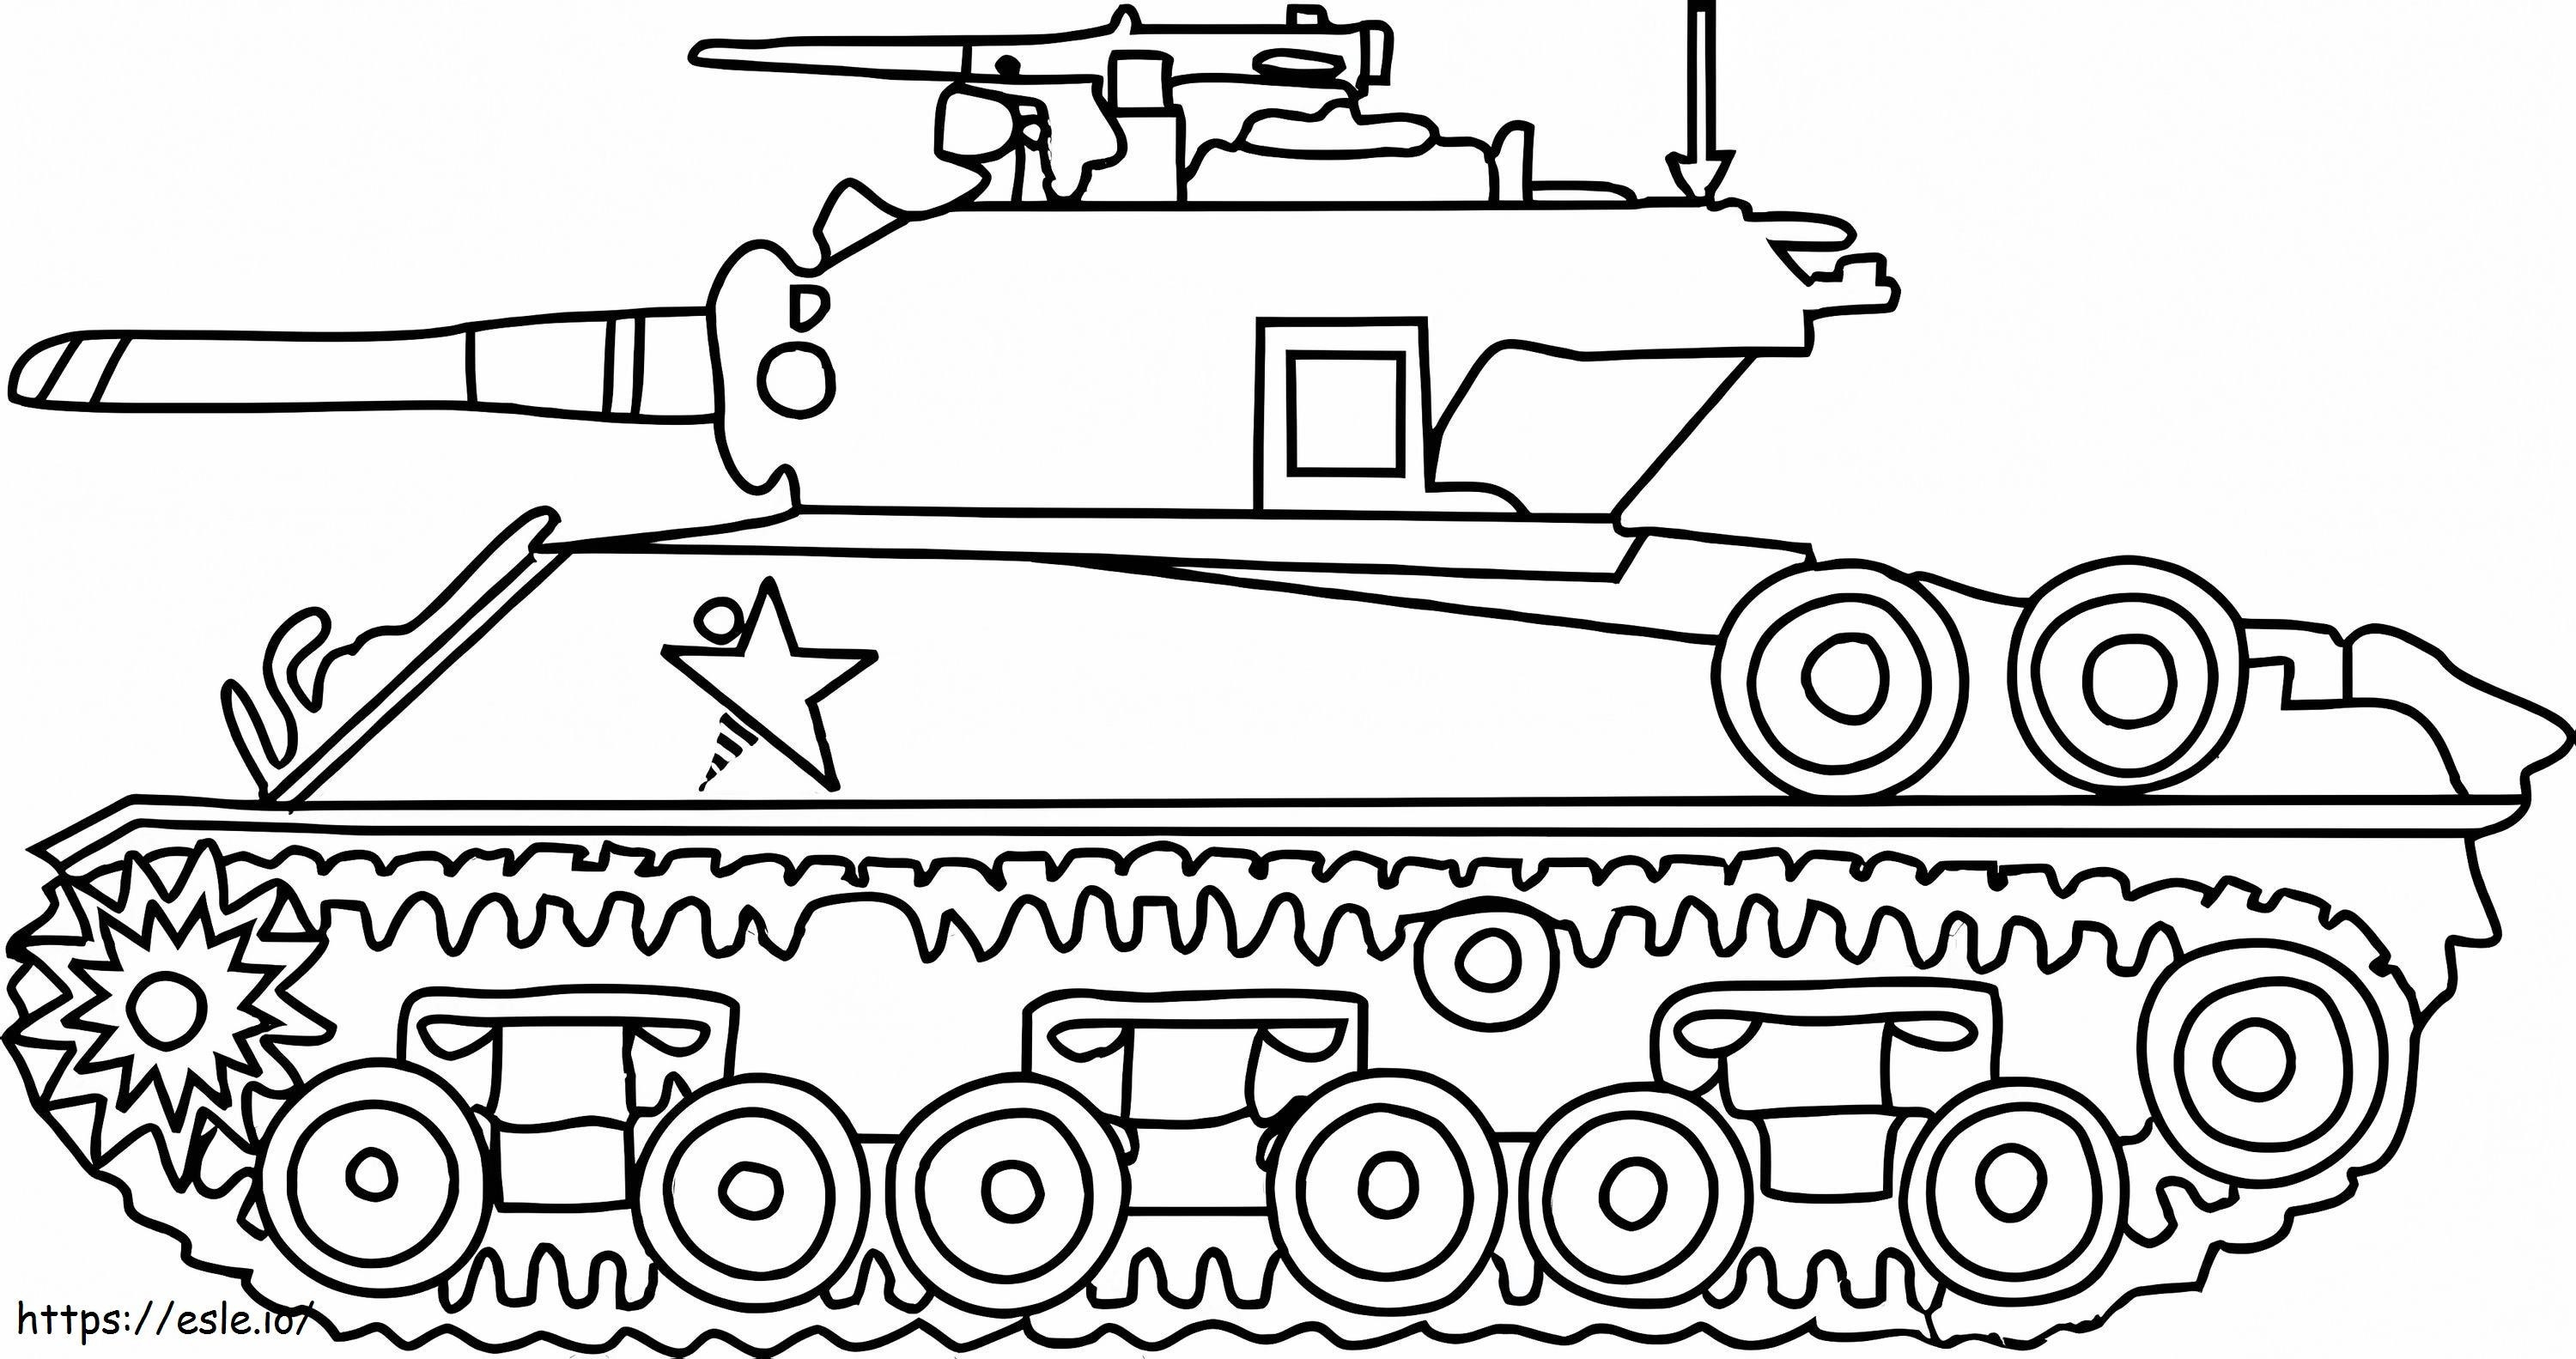 VN Tank coloring page